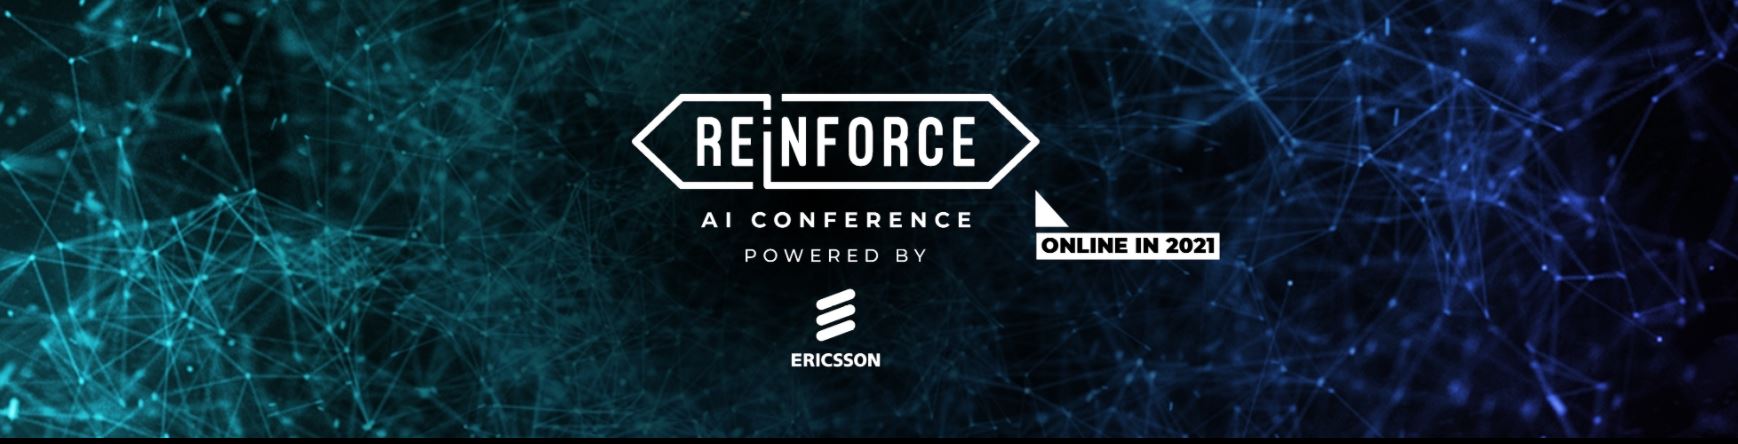 Reinforce AI Conference powered by Ericsson